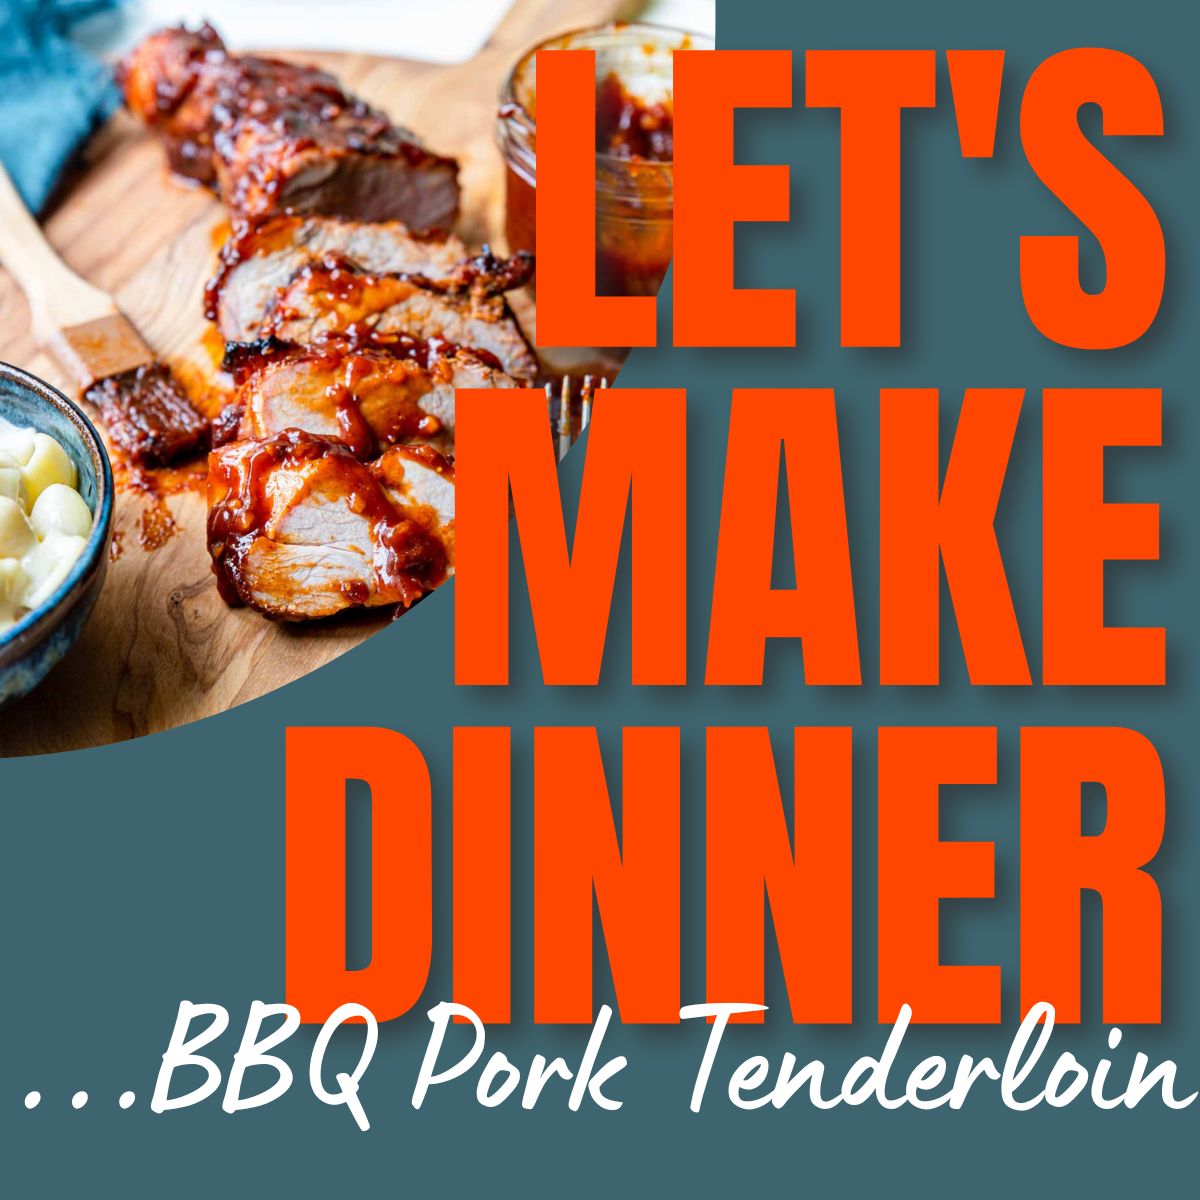 pork tenderloin on a cutting board with text overlay for Let's Make Dinner